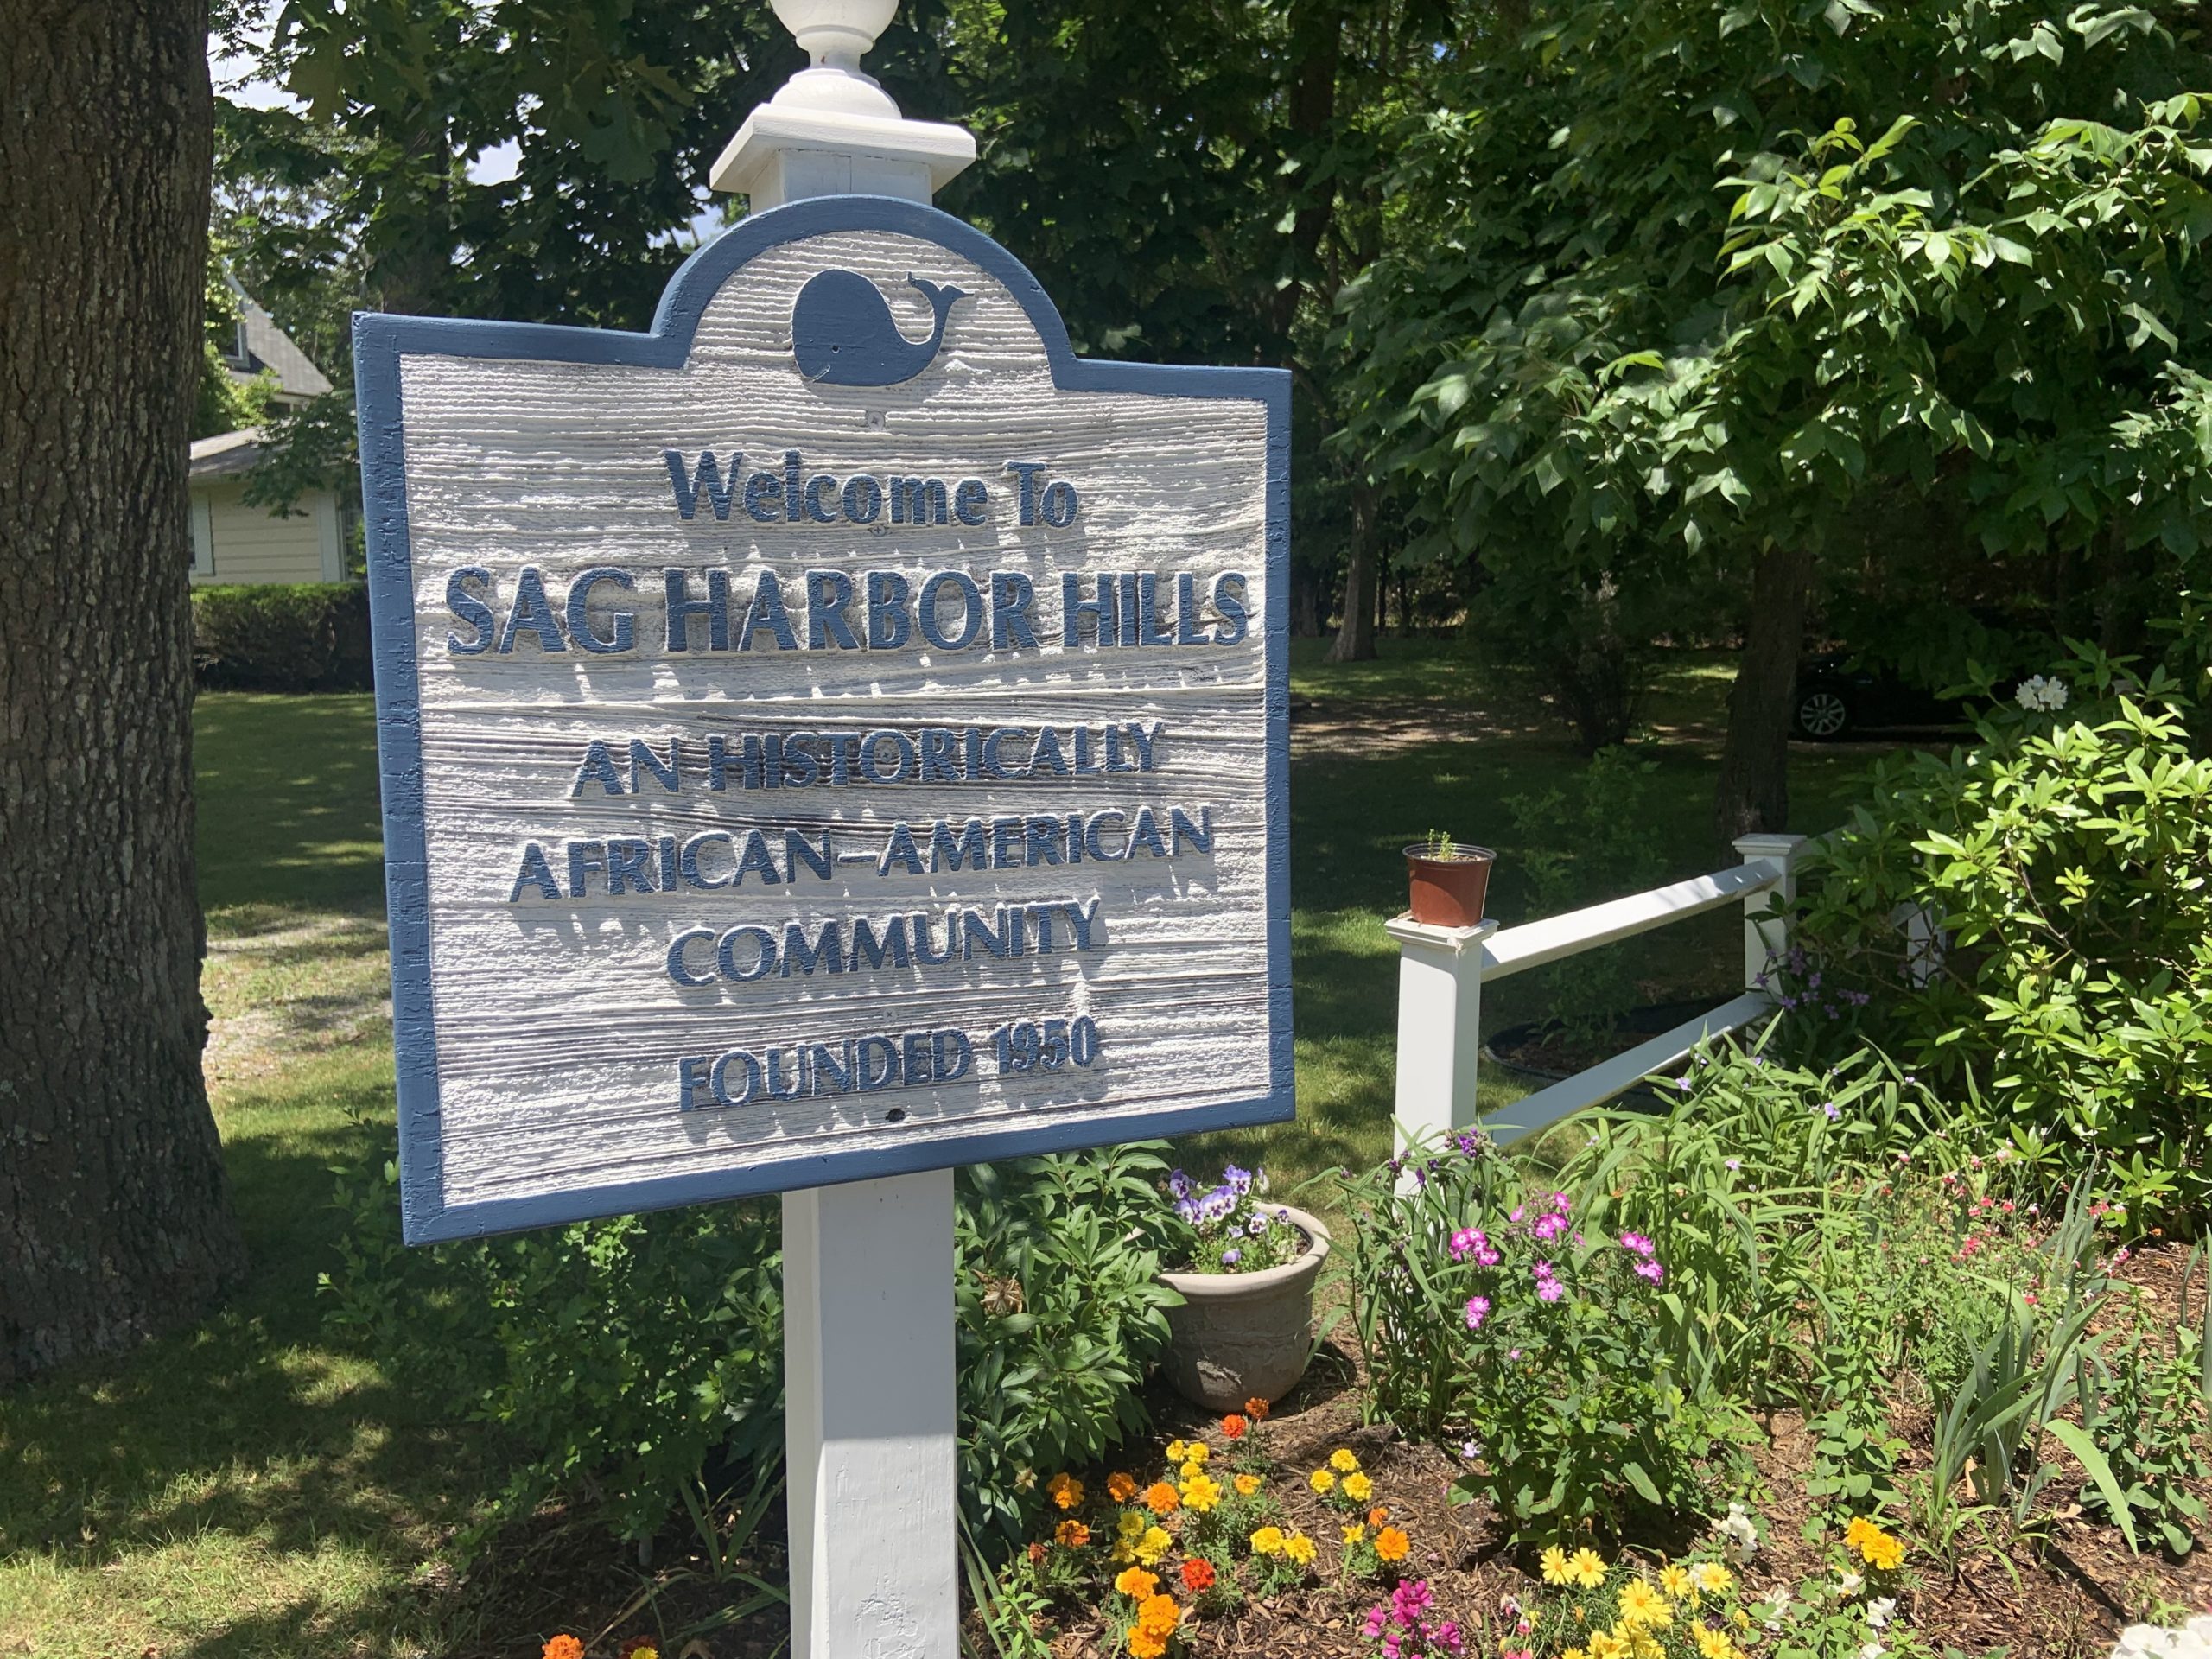 A sign at the entrance to the Sag Harbor Hills neighborhood in Sag Harbor refers to its history as an African American community. STEPHEN J. KOTZ